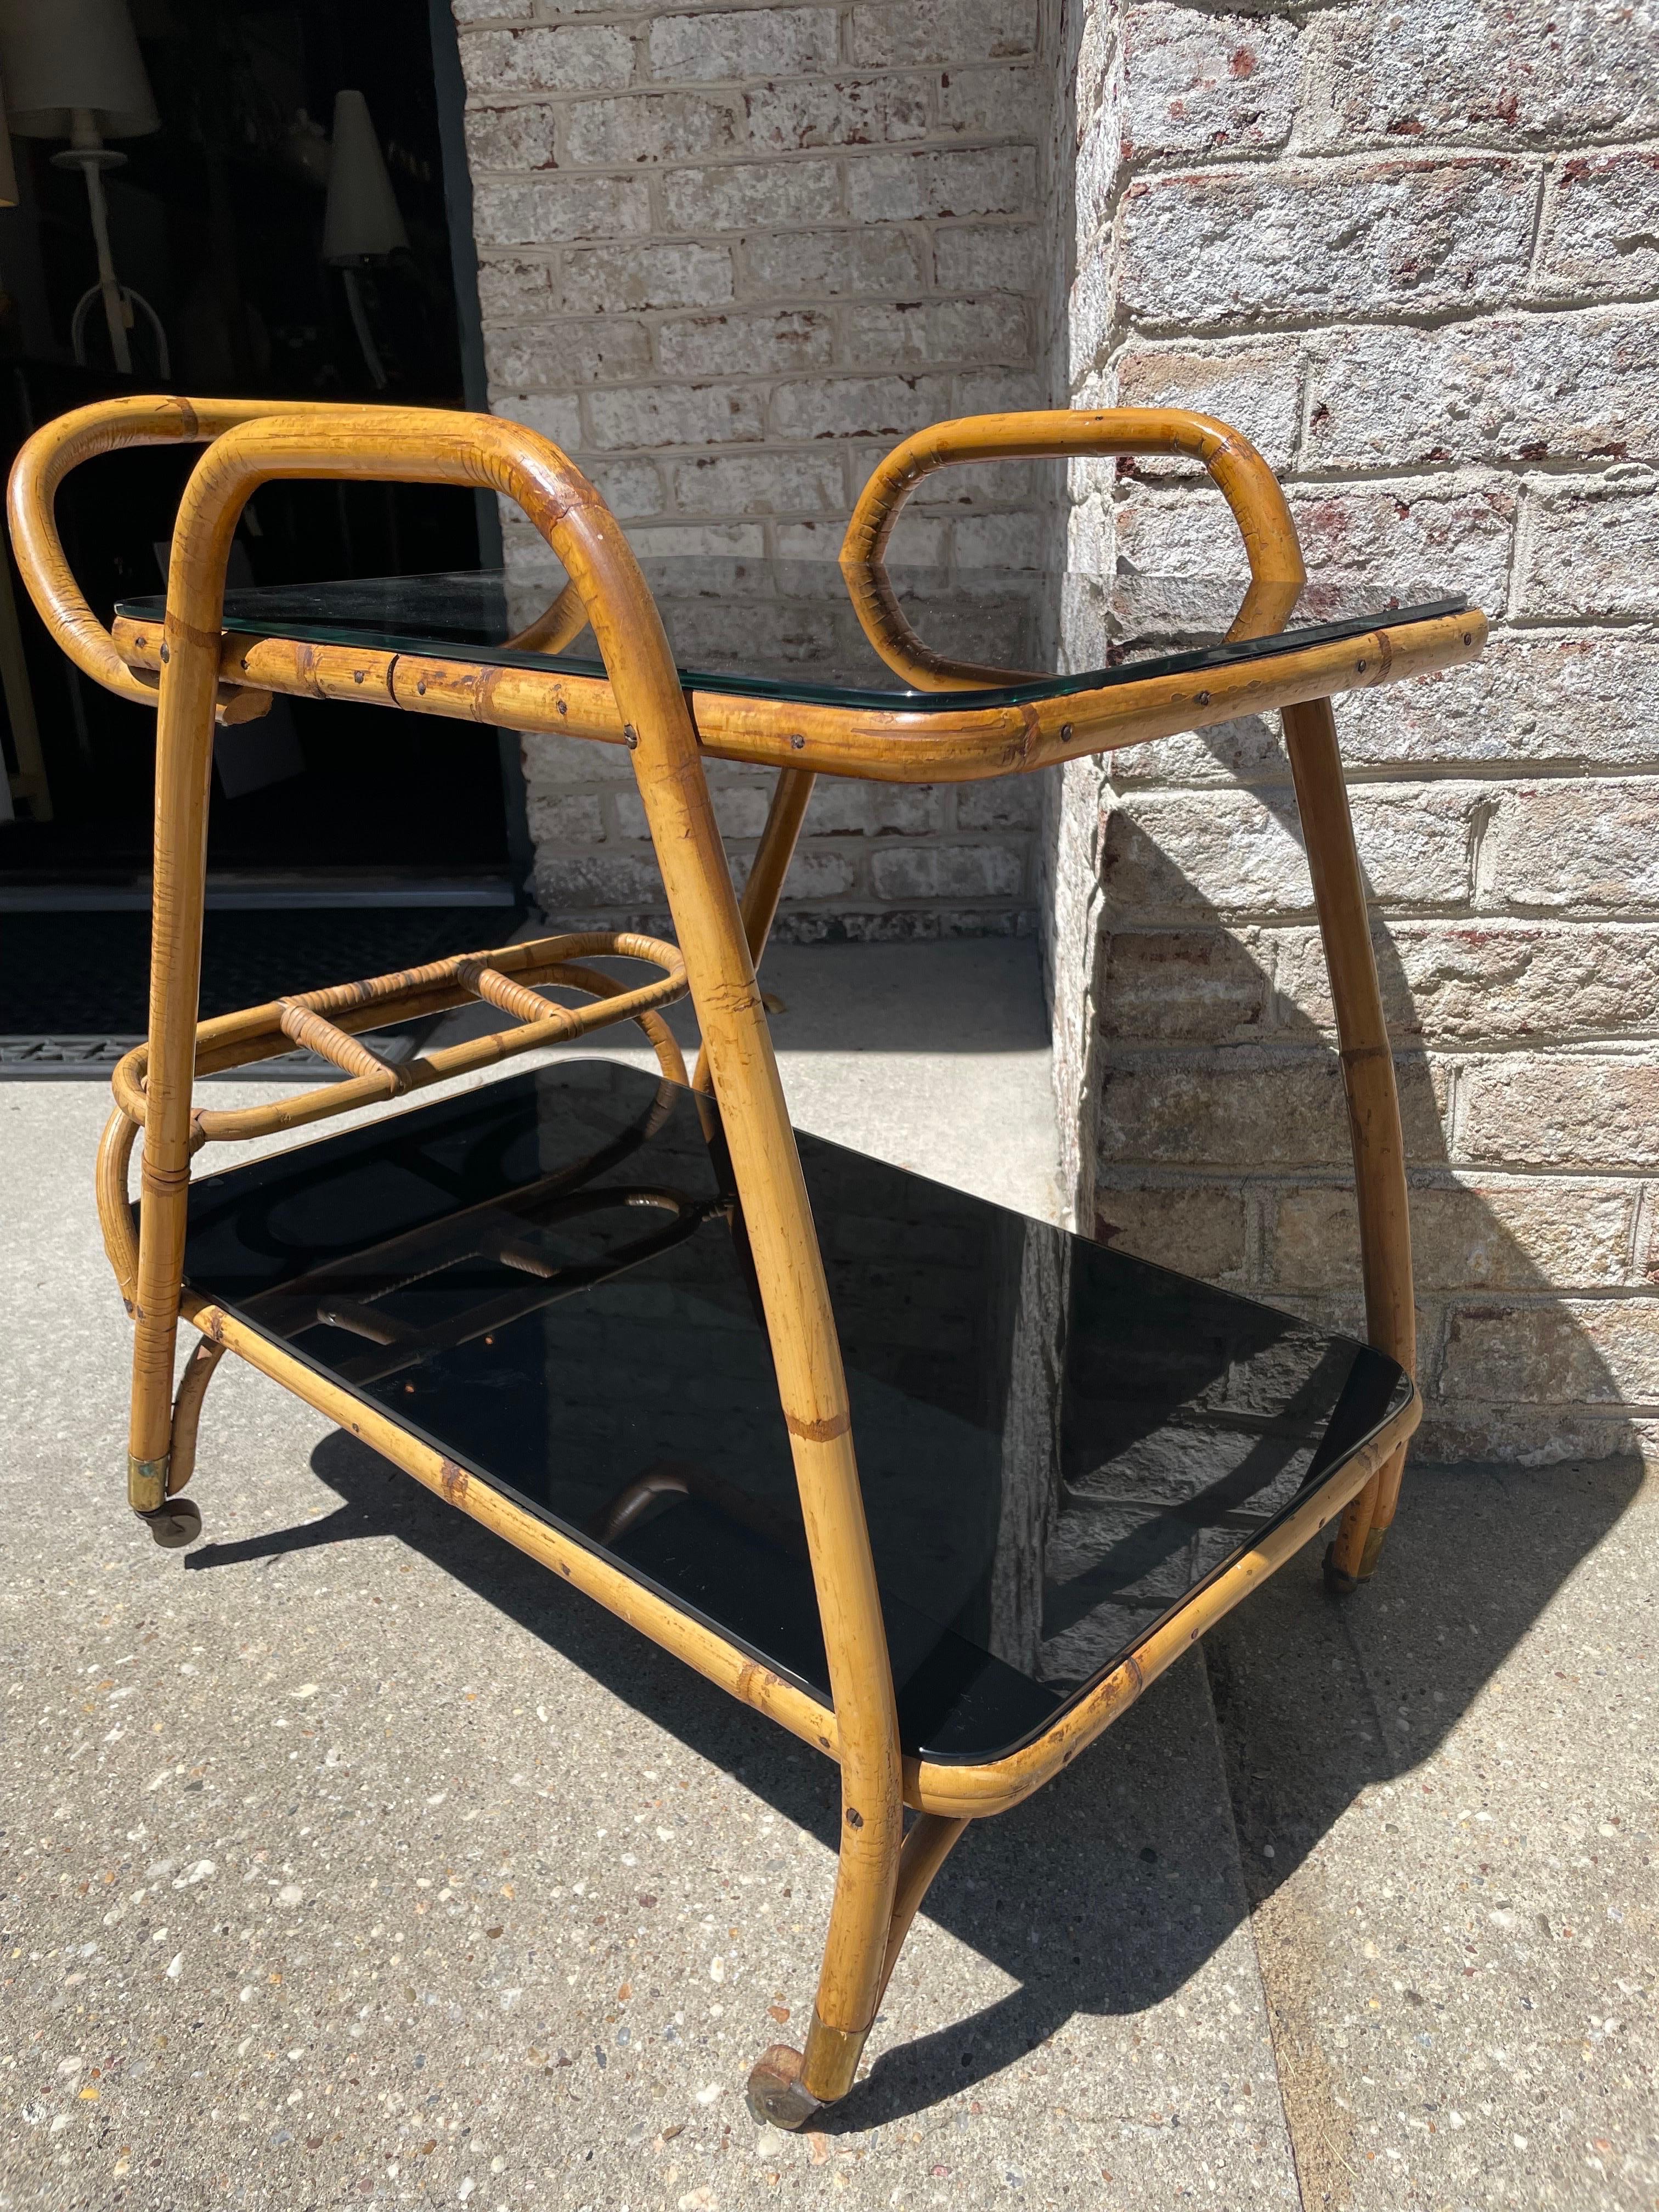 A fantastic bent bamboo trolley cart with bottle holder dividers. This piece has its original blue laminate design and black glass tops which were added later to really elevate the beauty of this Italian mid-century design. Glass can be removed